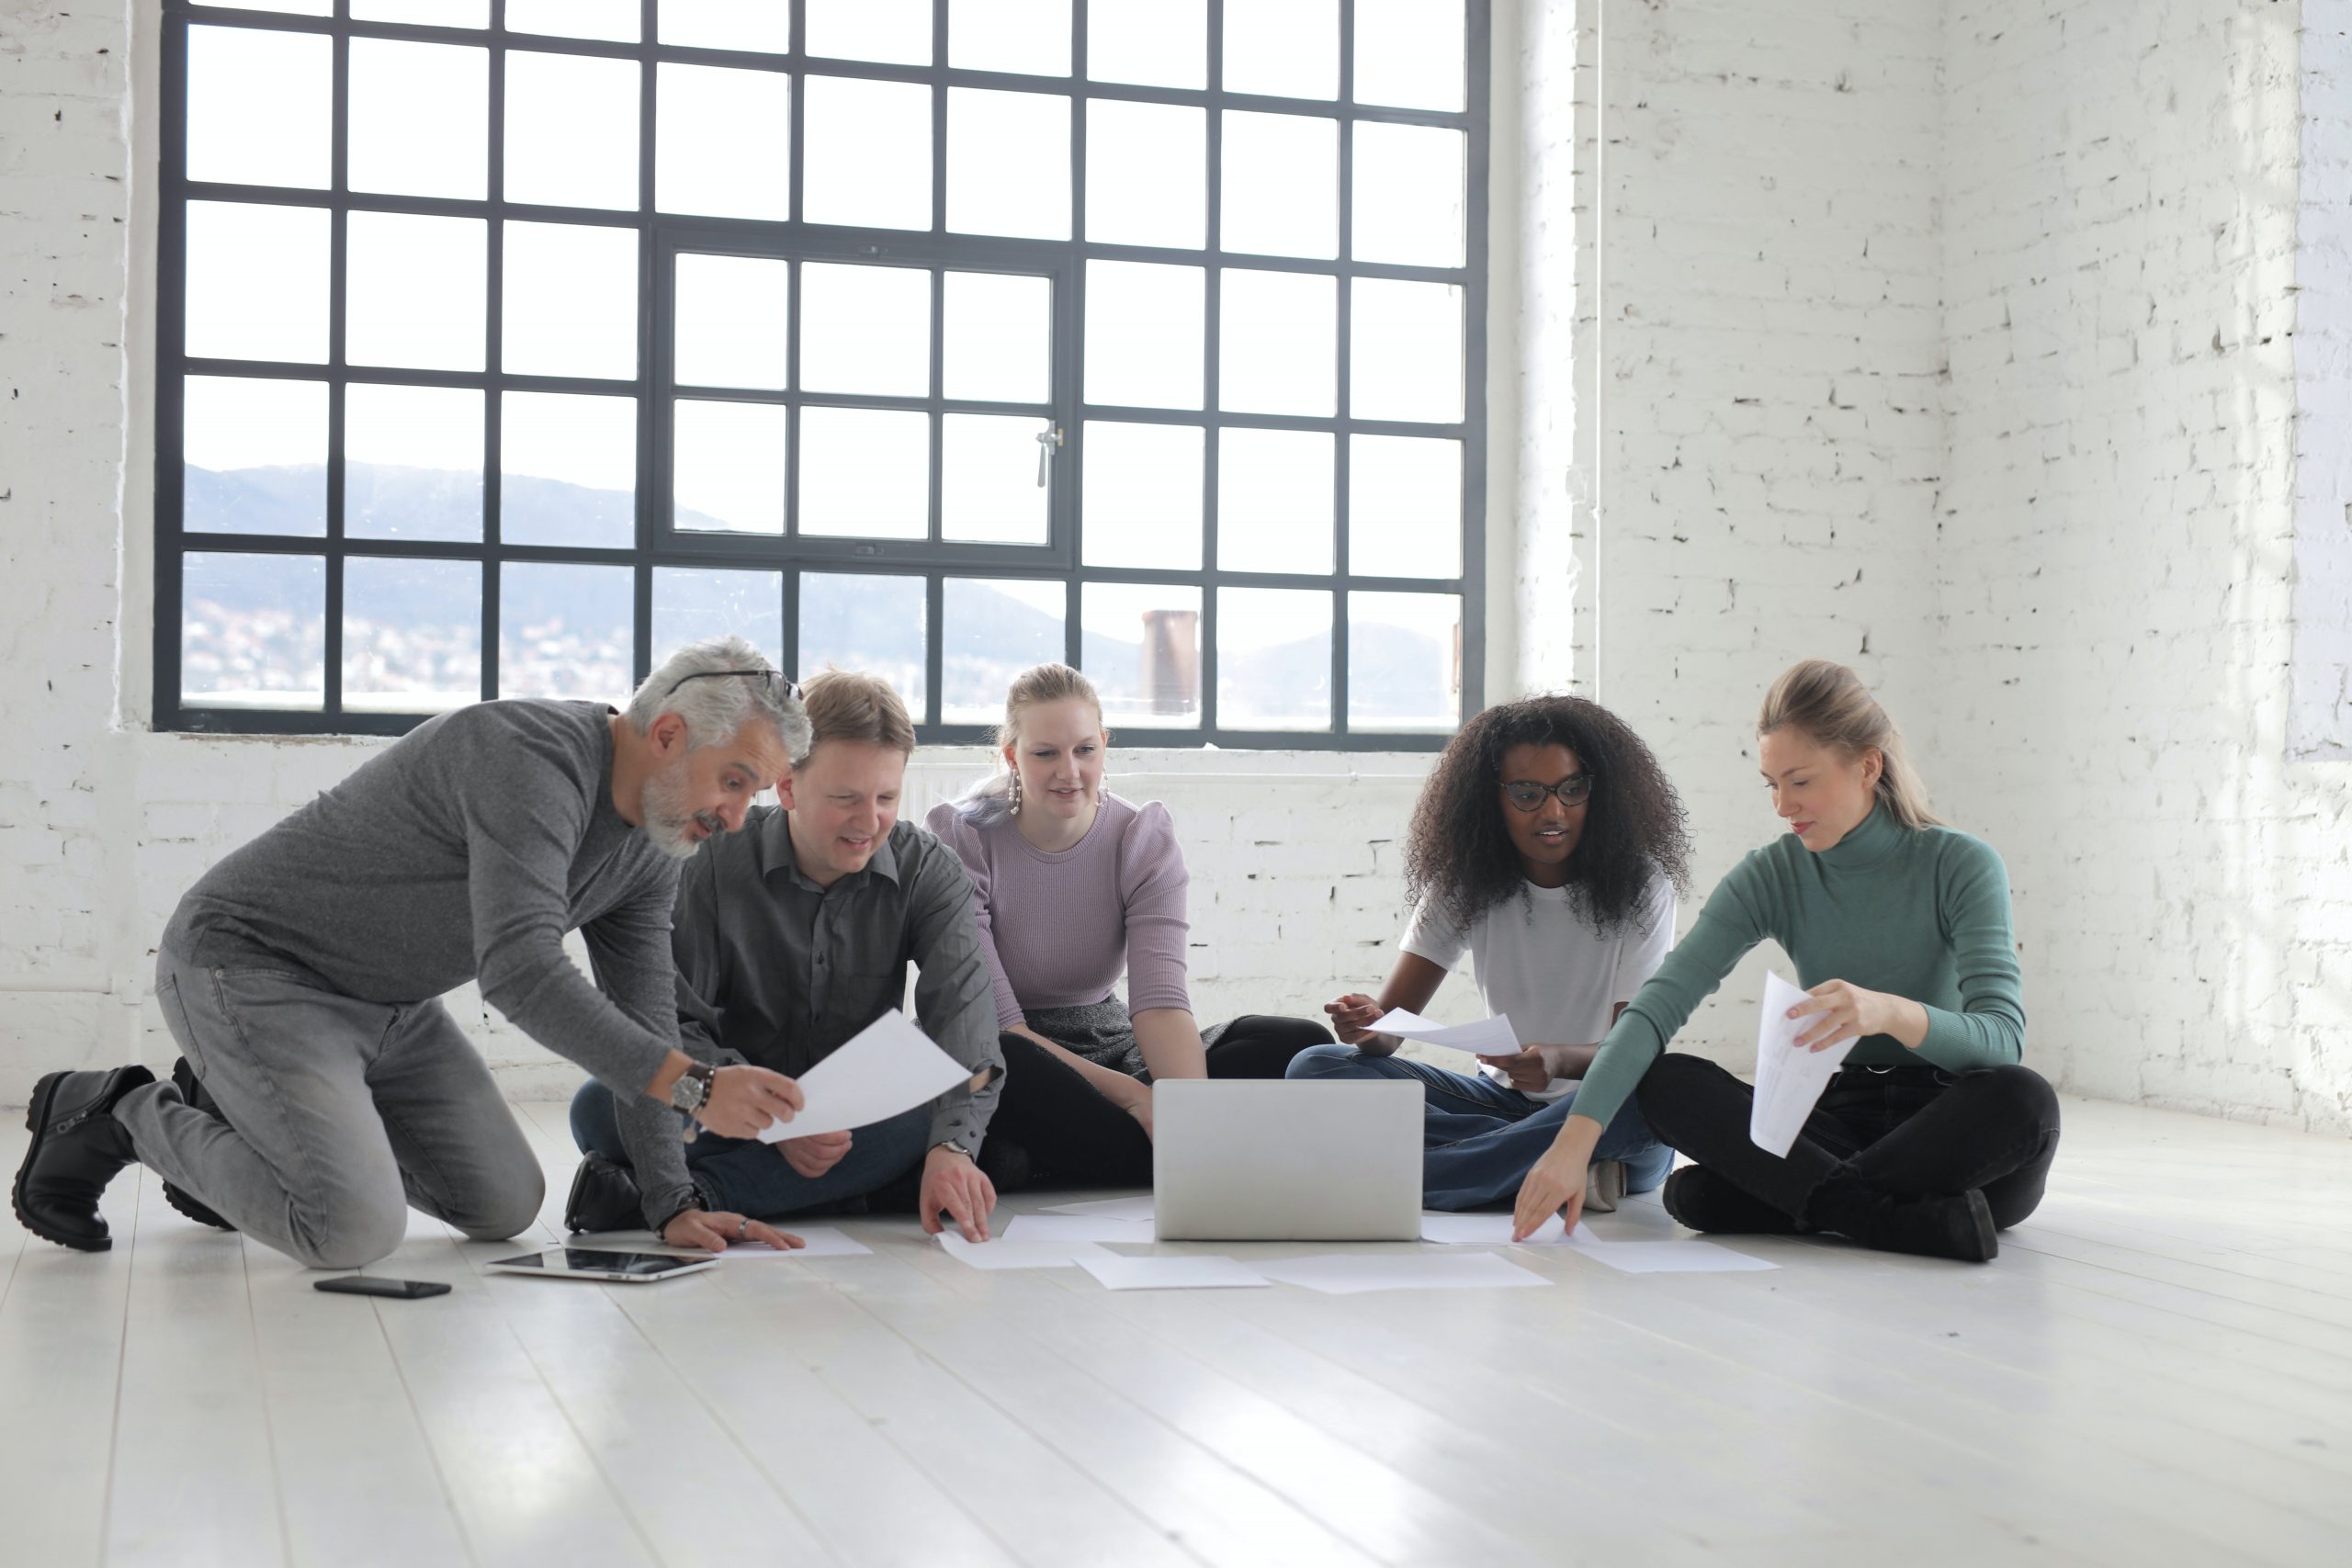 group-of-people-sitting-on-the-floor-while-working-3863830 (1)